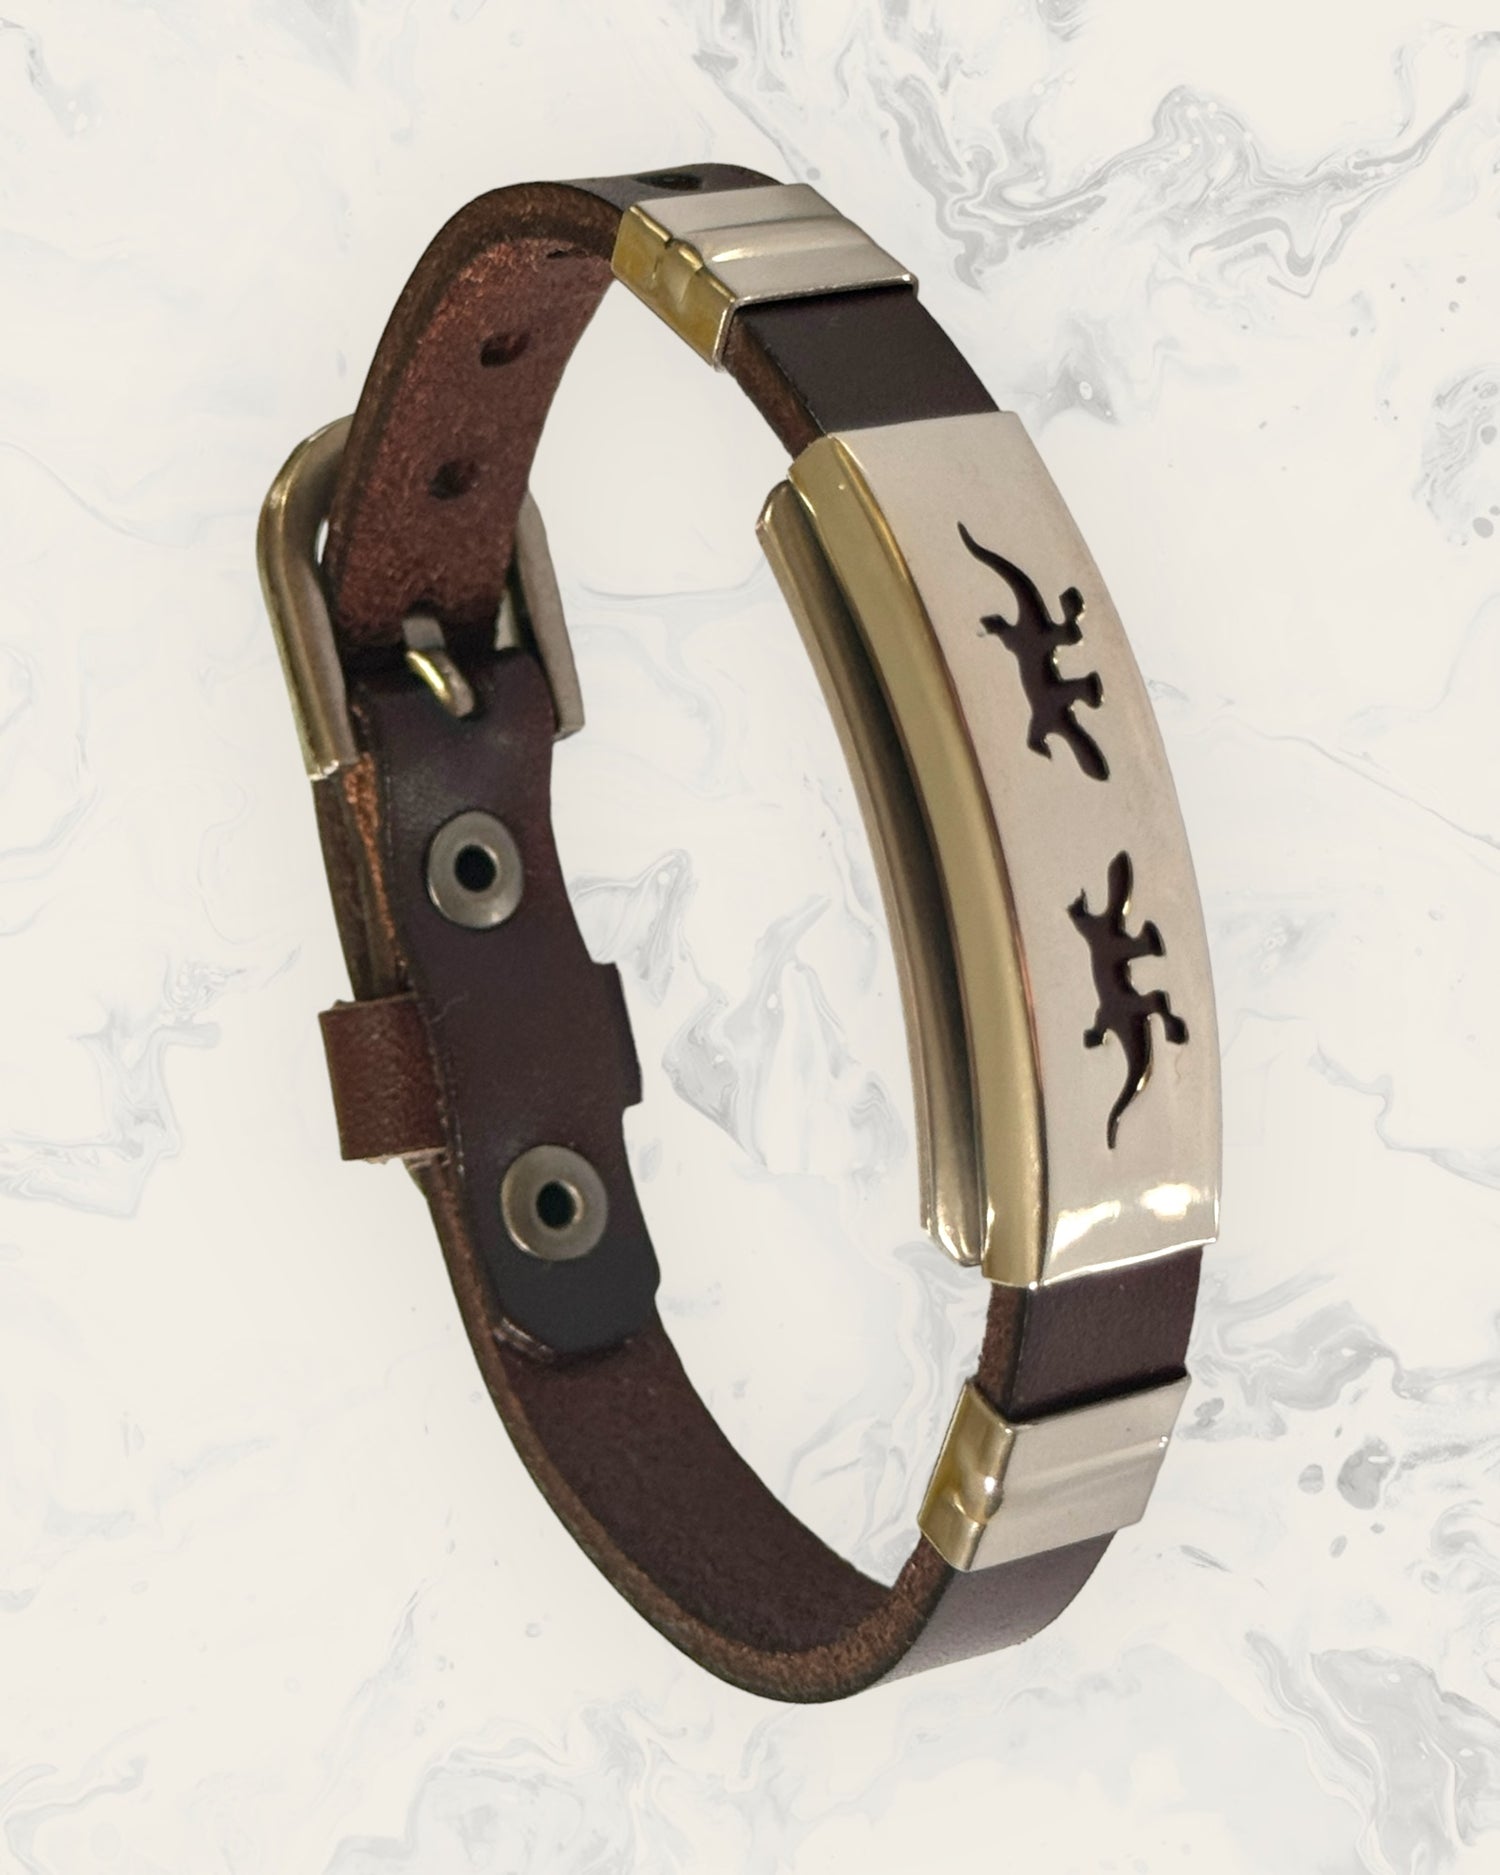 Natural Pain Relief and EMF Protection Bracelet Leather Band Color Dark Brown with Two Geckos design on a silver metal slider